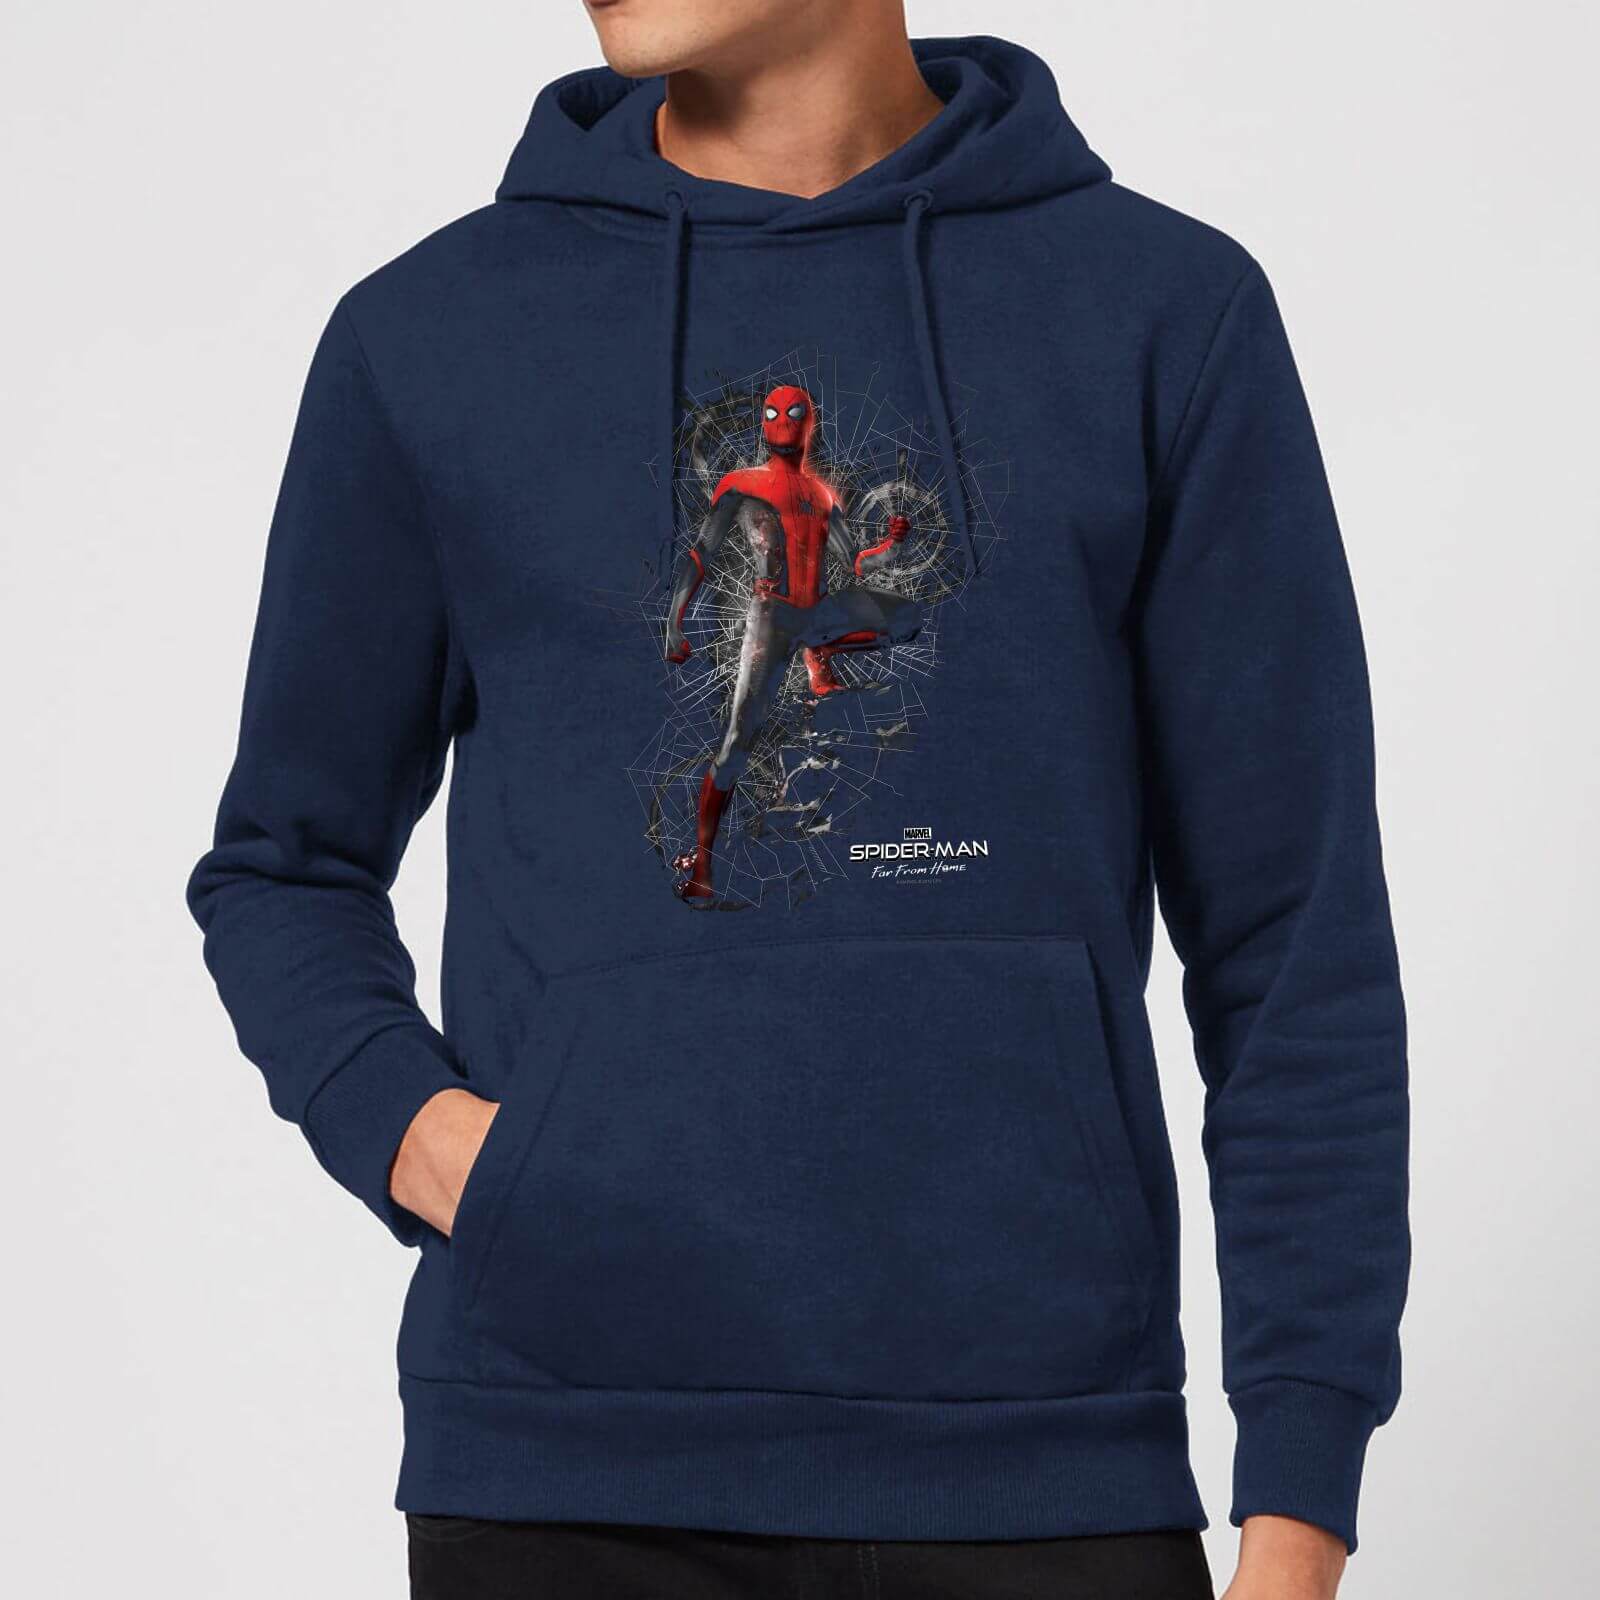 Spider-Man Far From Home Upgraded Suit Hoodie - Navy - L